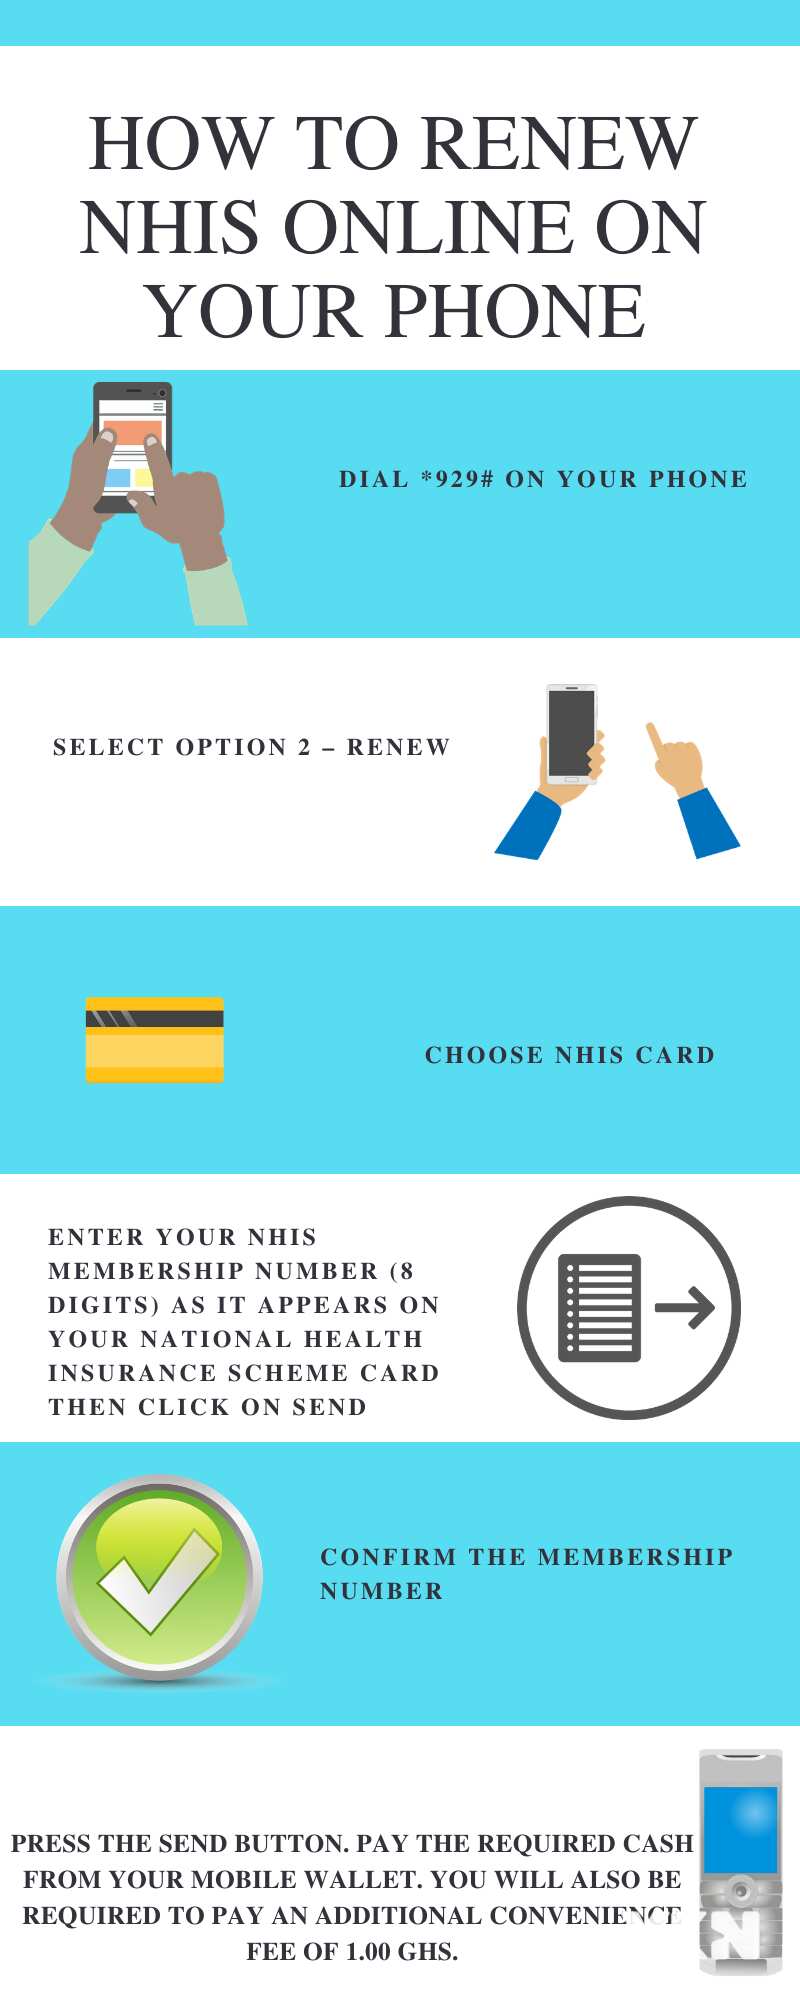 How to renew NHIS